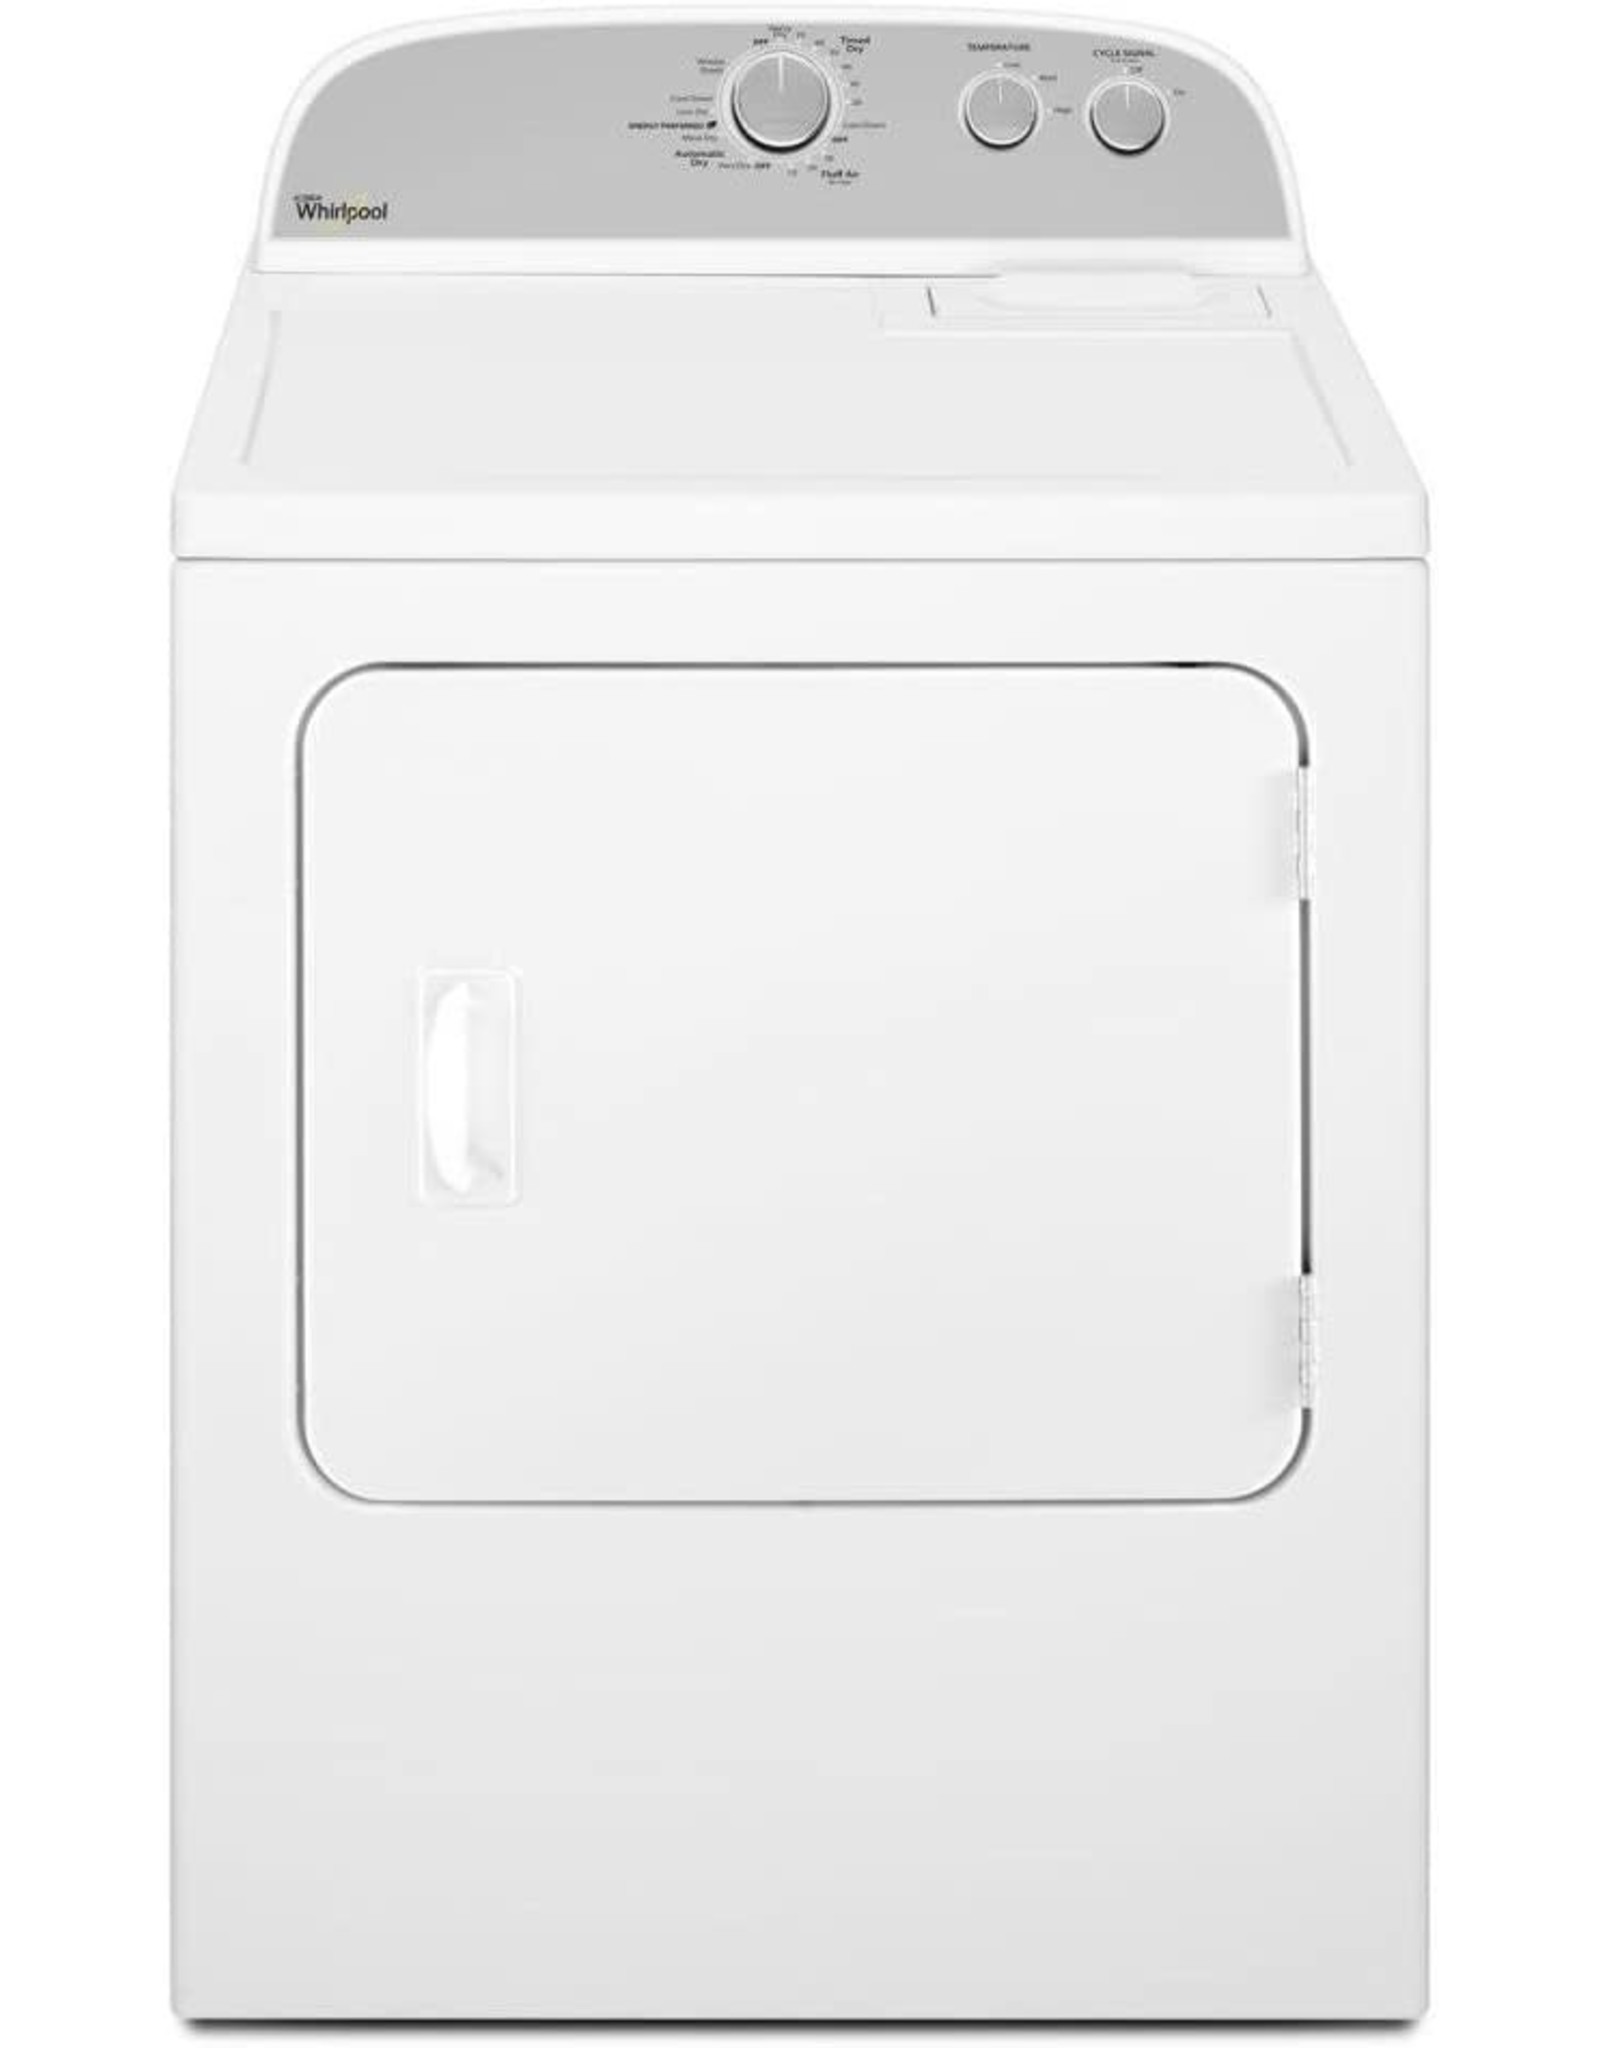 7.0 cu.ft Top Load Electric Dryer with AutoDry?